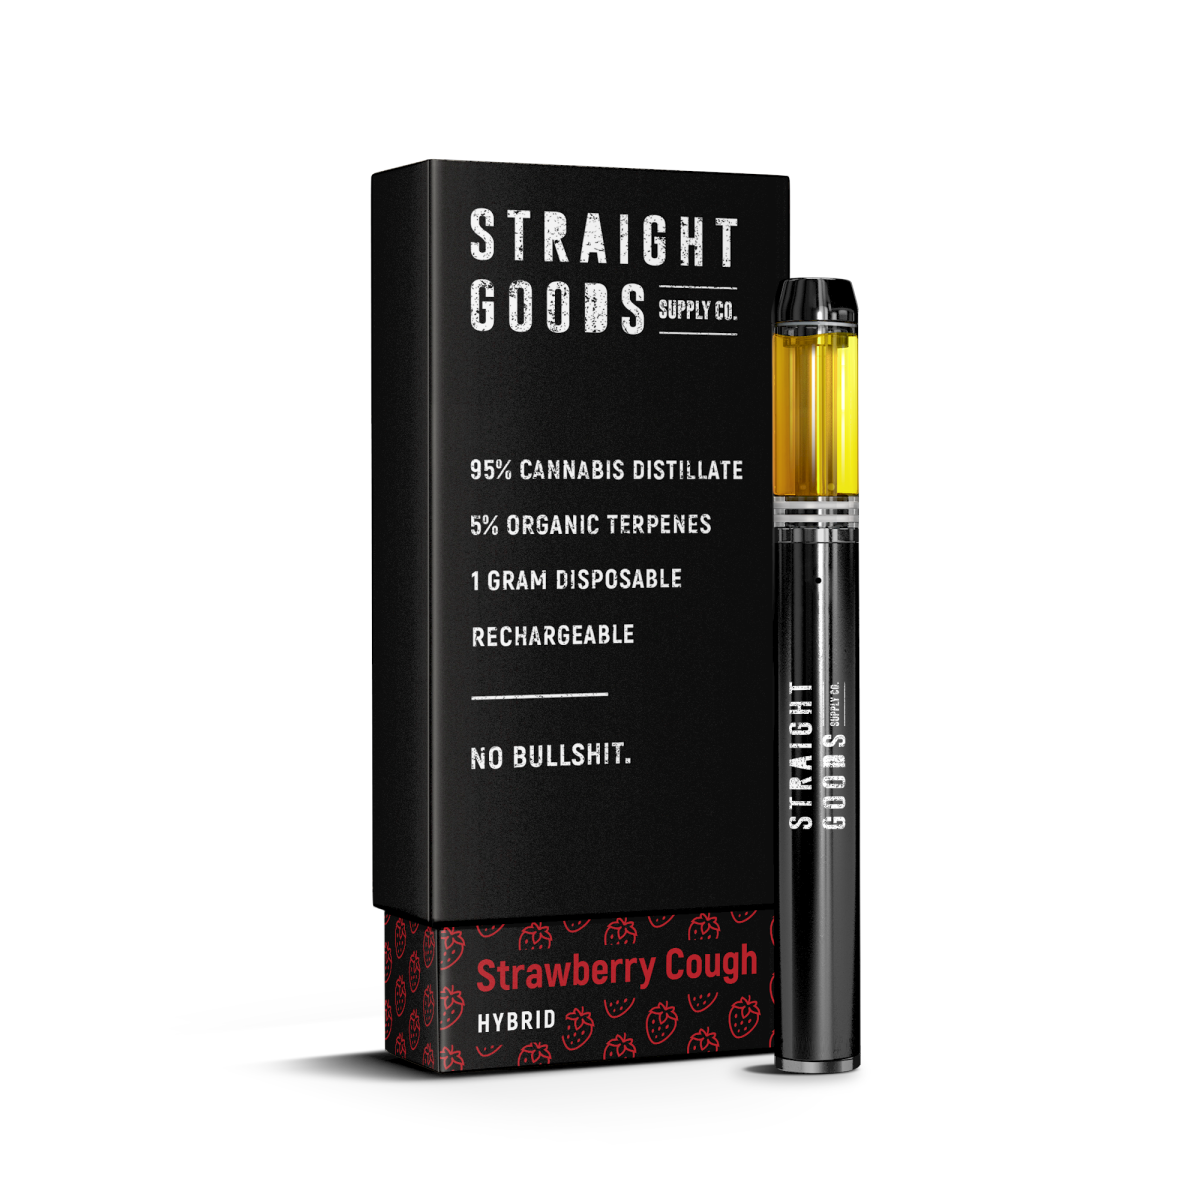 Buy Straight Goods - Strawberry Cough (Hybrid) Disposable Pen 1GR at MMJ Express Online Shop